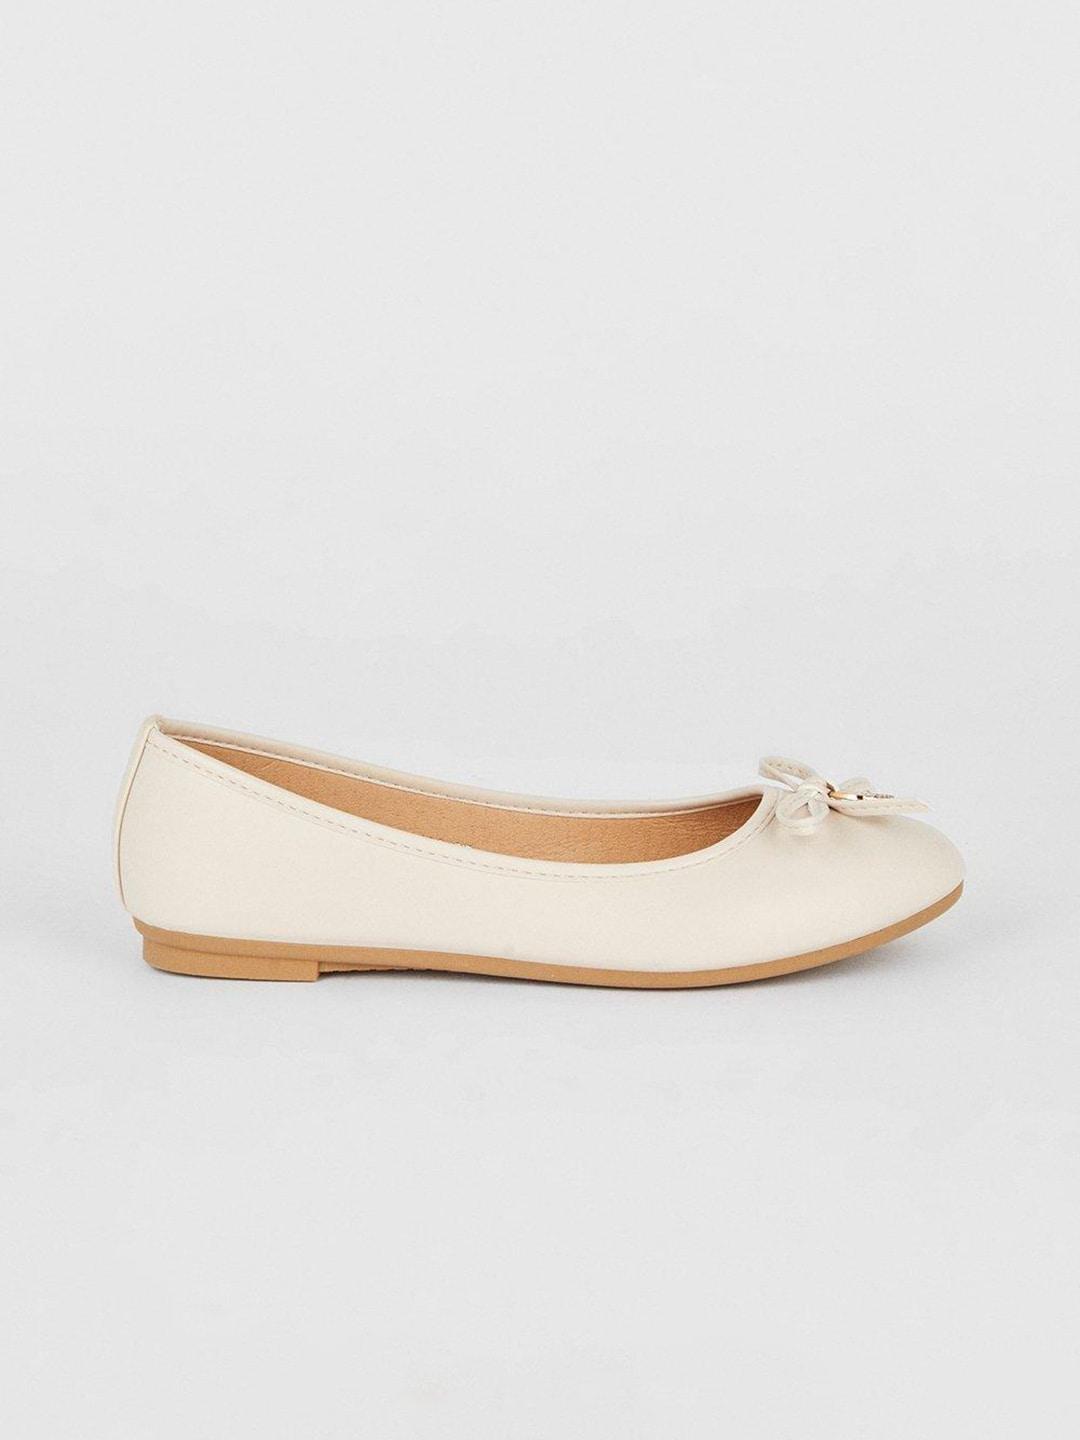 DOROTHY PERKINS Women Ballerinas with Bows Detail